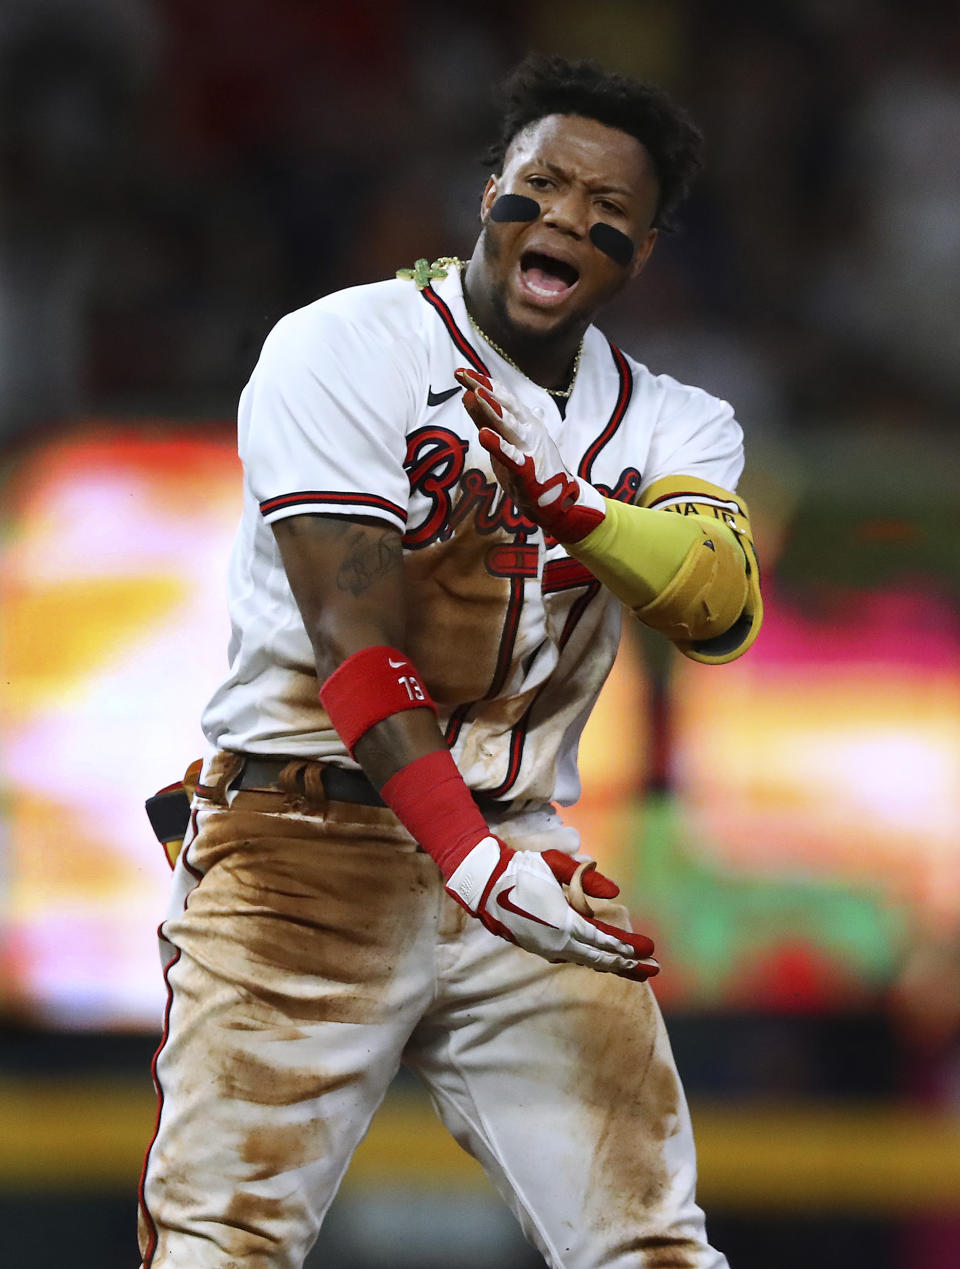 Atlanta Braves outfielder Ronald Acuna yells after sliding into second base for an RBI double against the New York Mets during the fourth inning of a baseball game Monday, Aug, 15, 2022, in Atlanta. (Curtis Compton//Atlanta Journal-Constitution via AP)